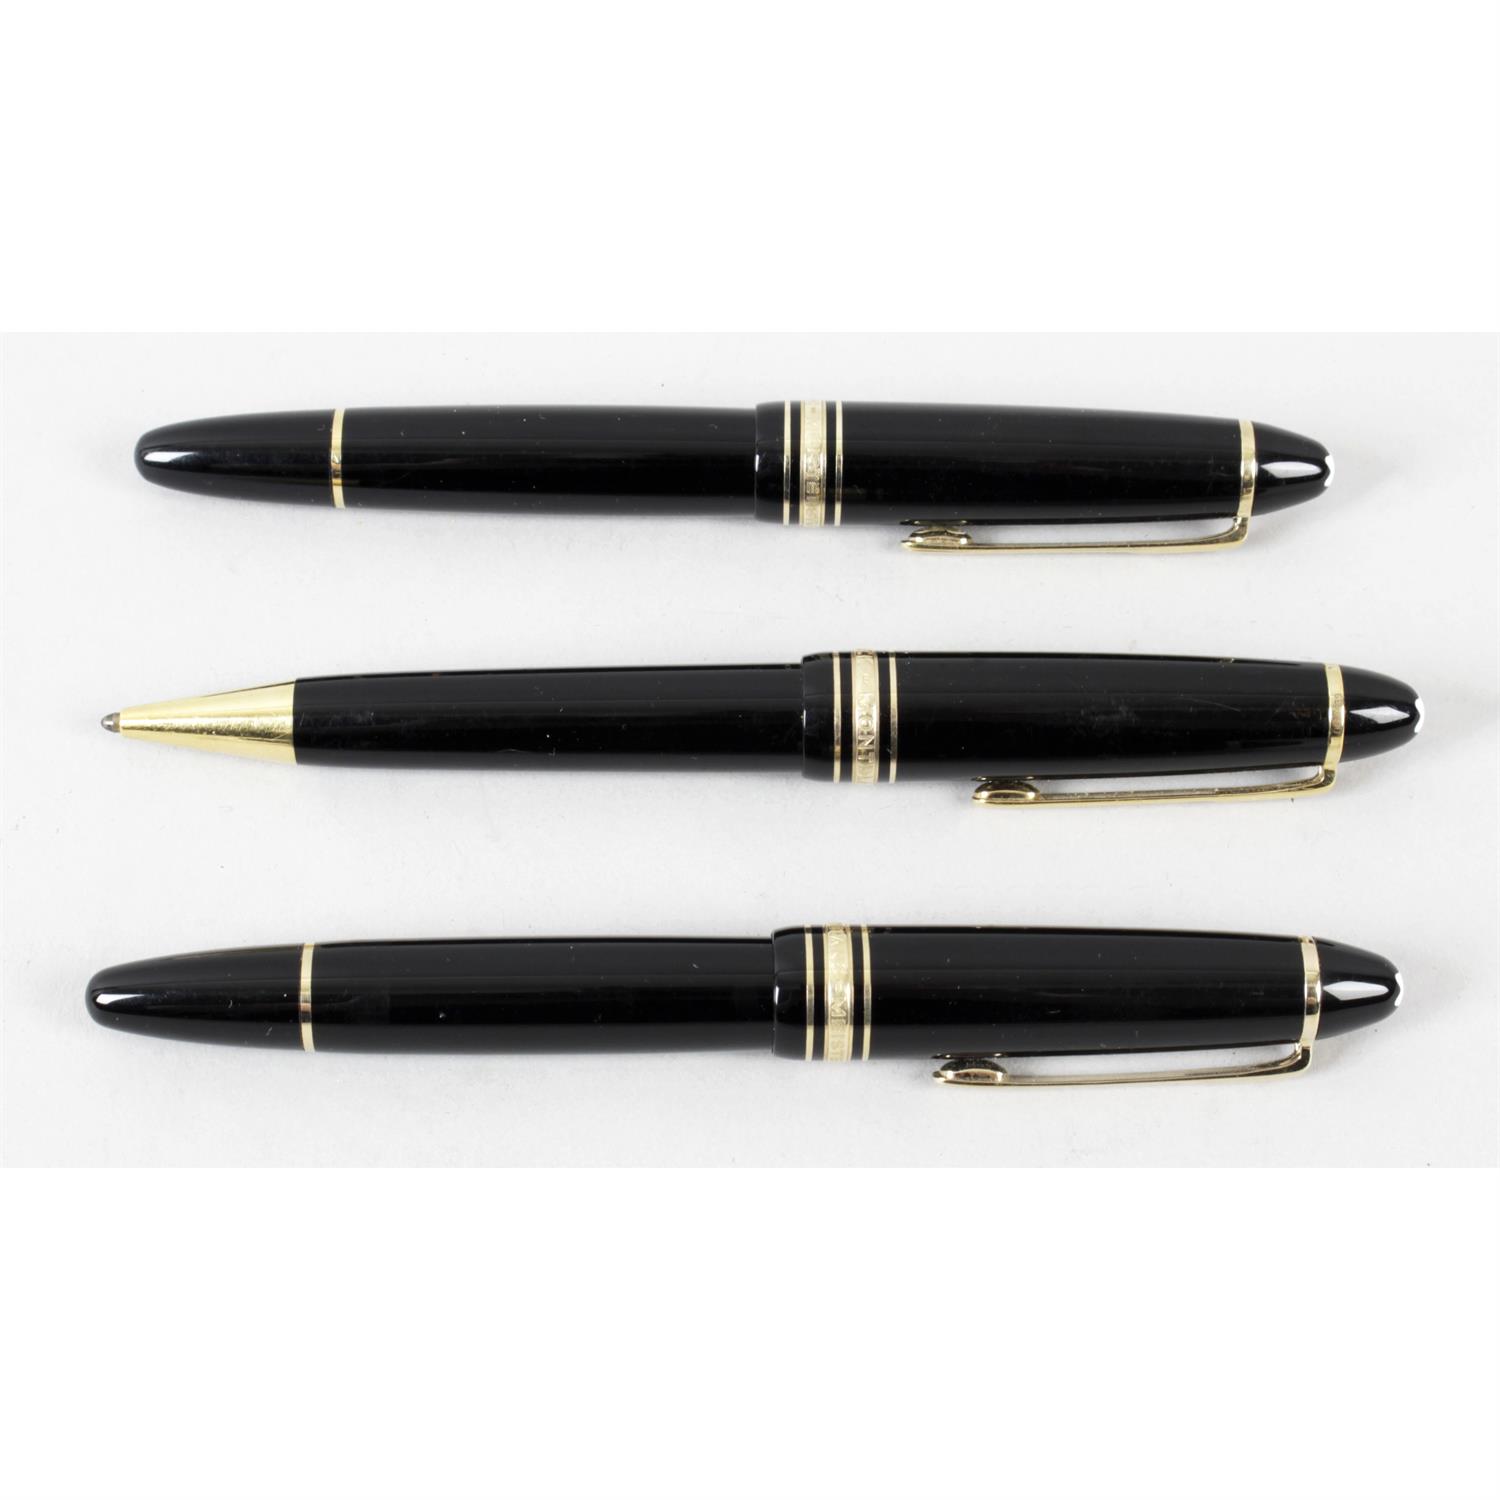 A selection of Montblanc Meisterstuck pens. (3)